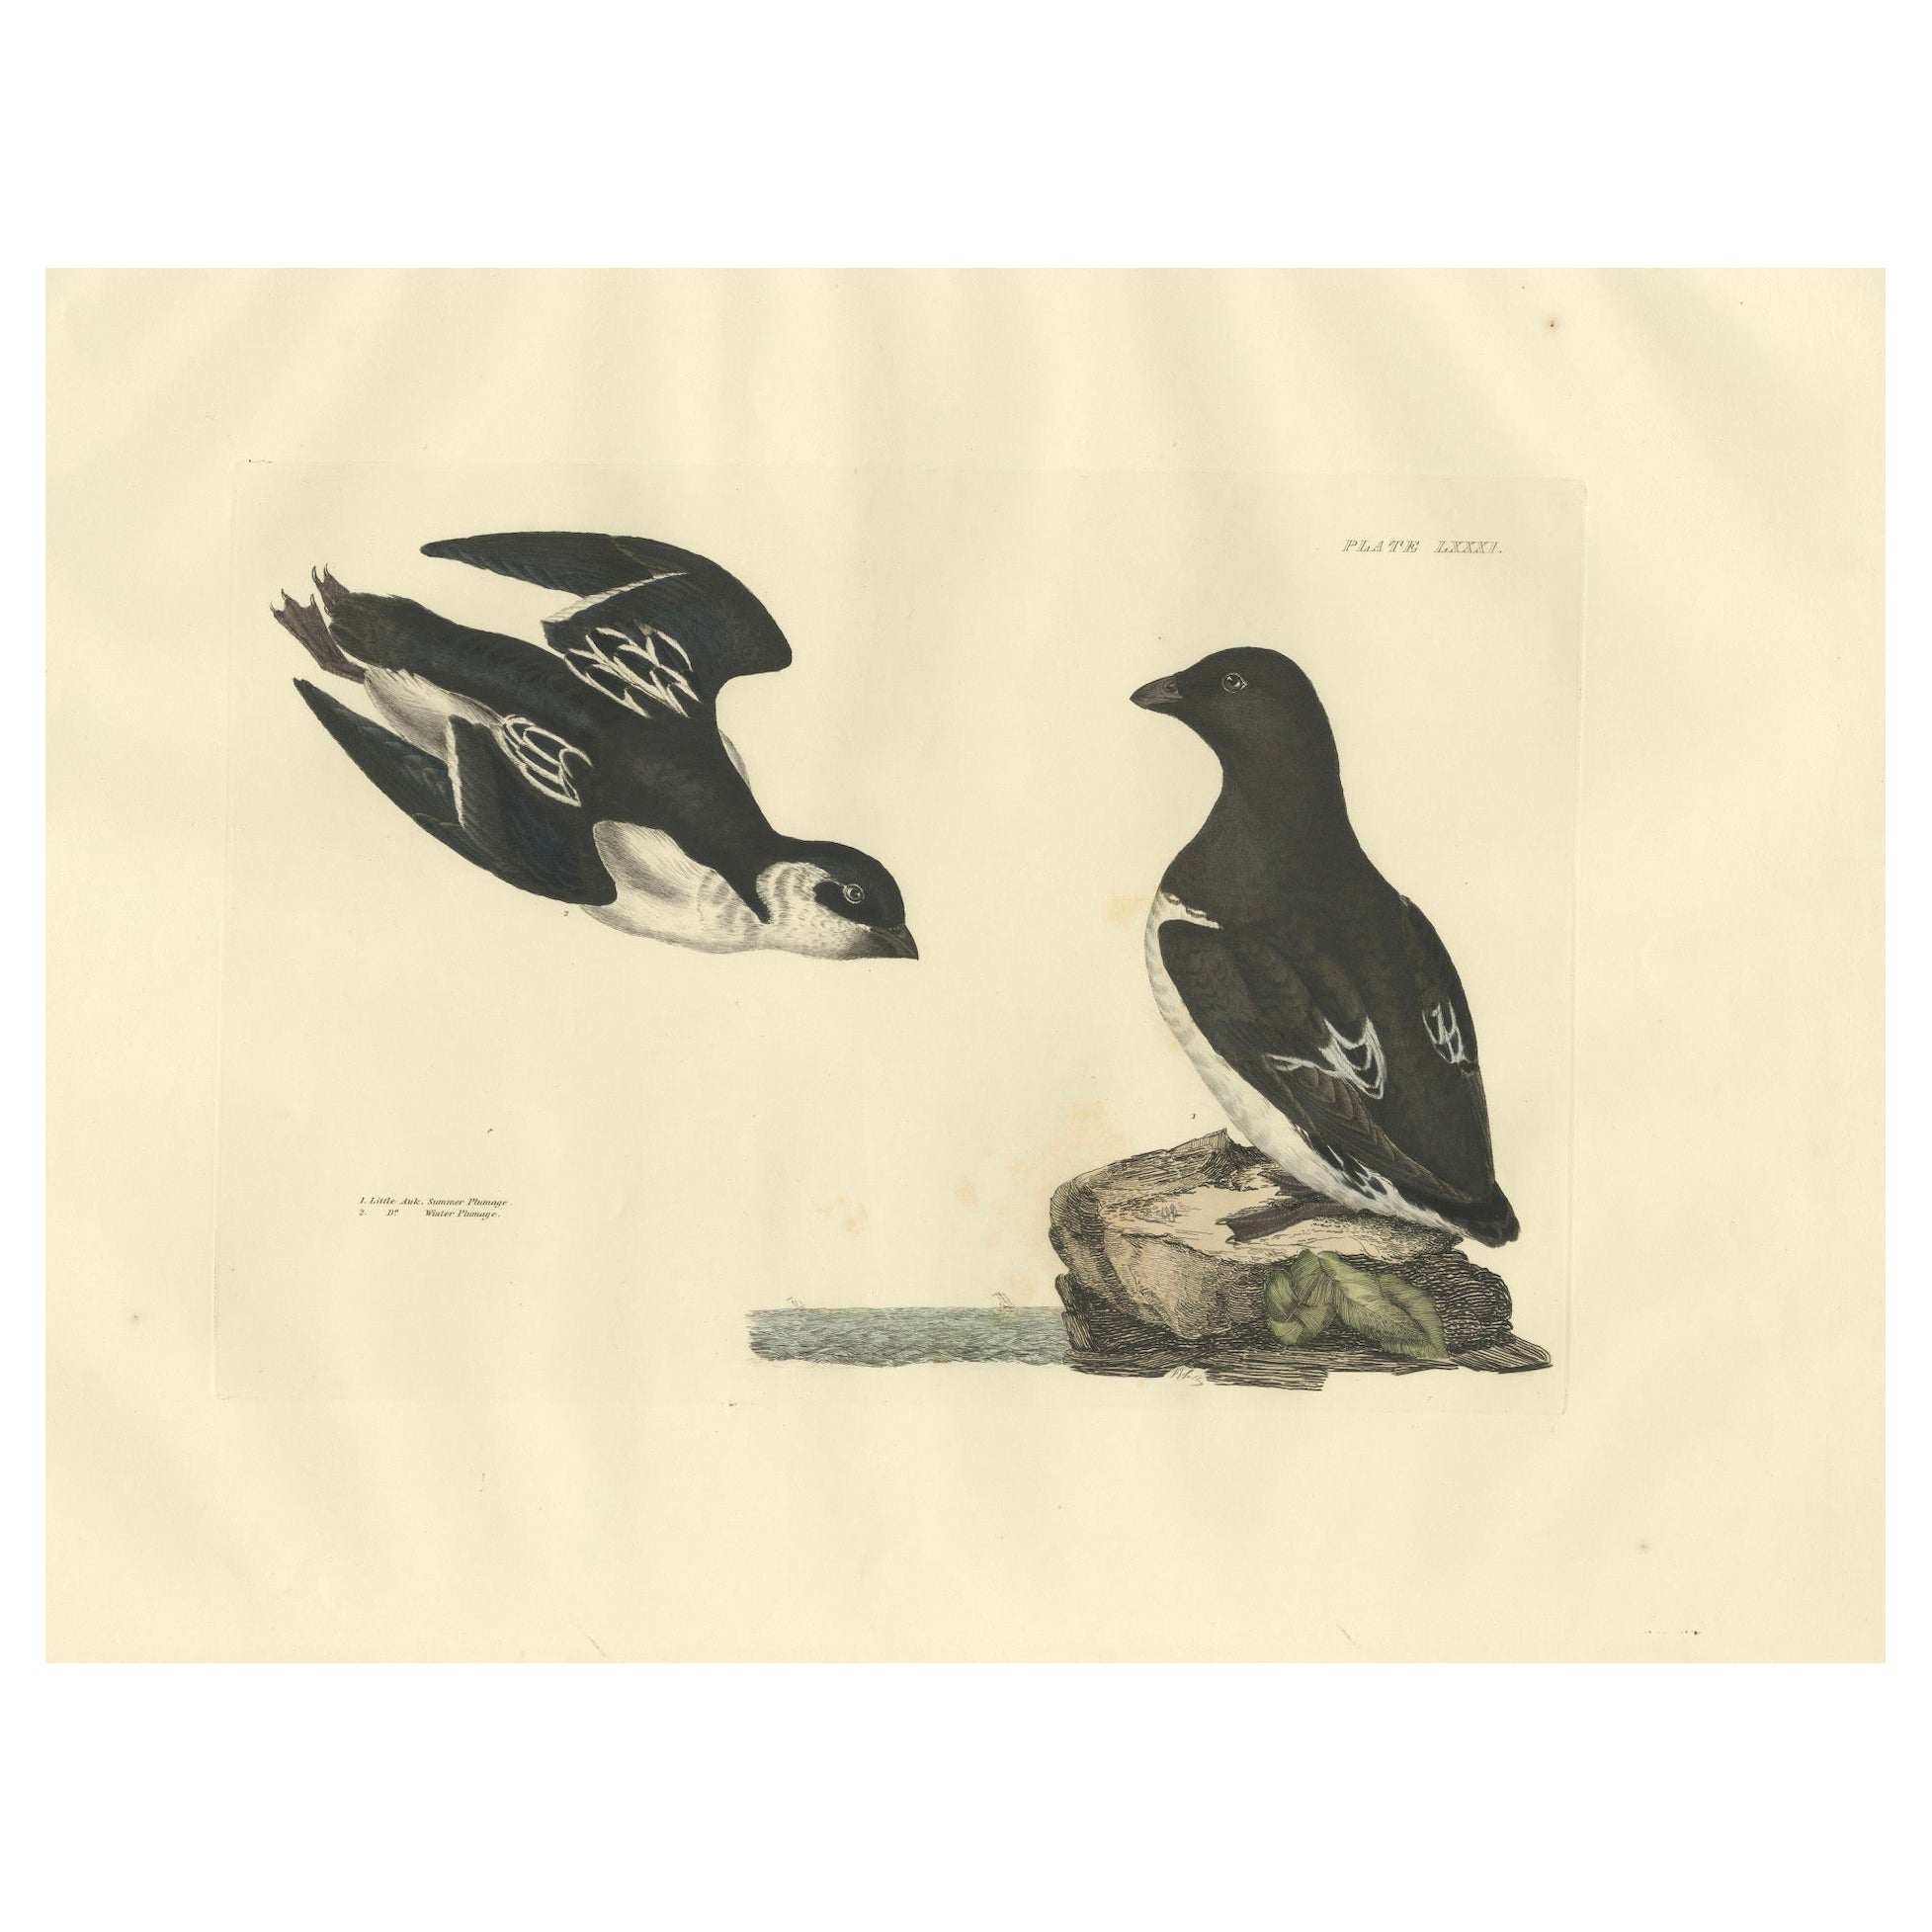 The Little Auk - A Life Seize Study Engraved in Seasonal Plumage by Selby, 1826